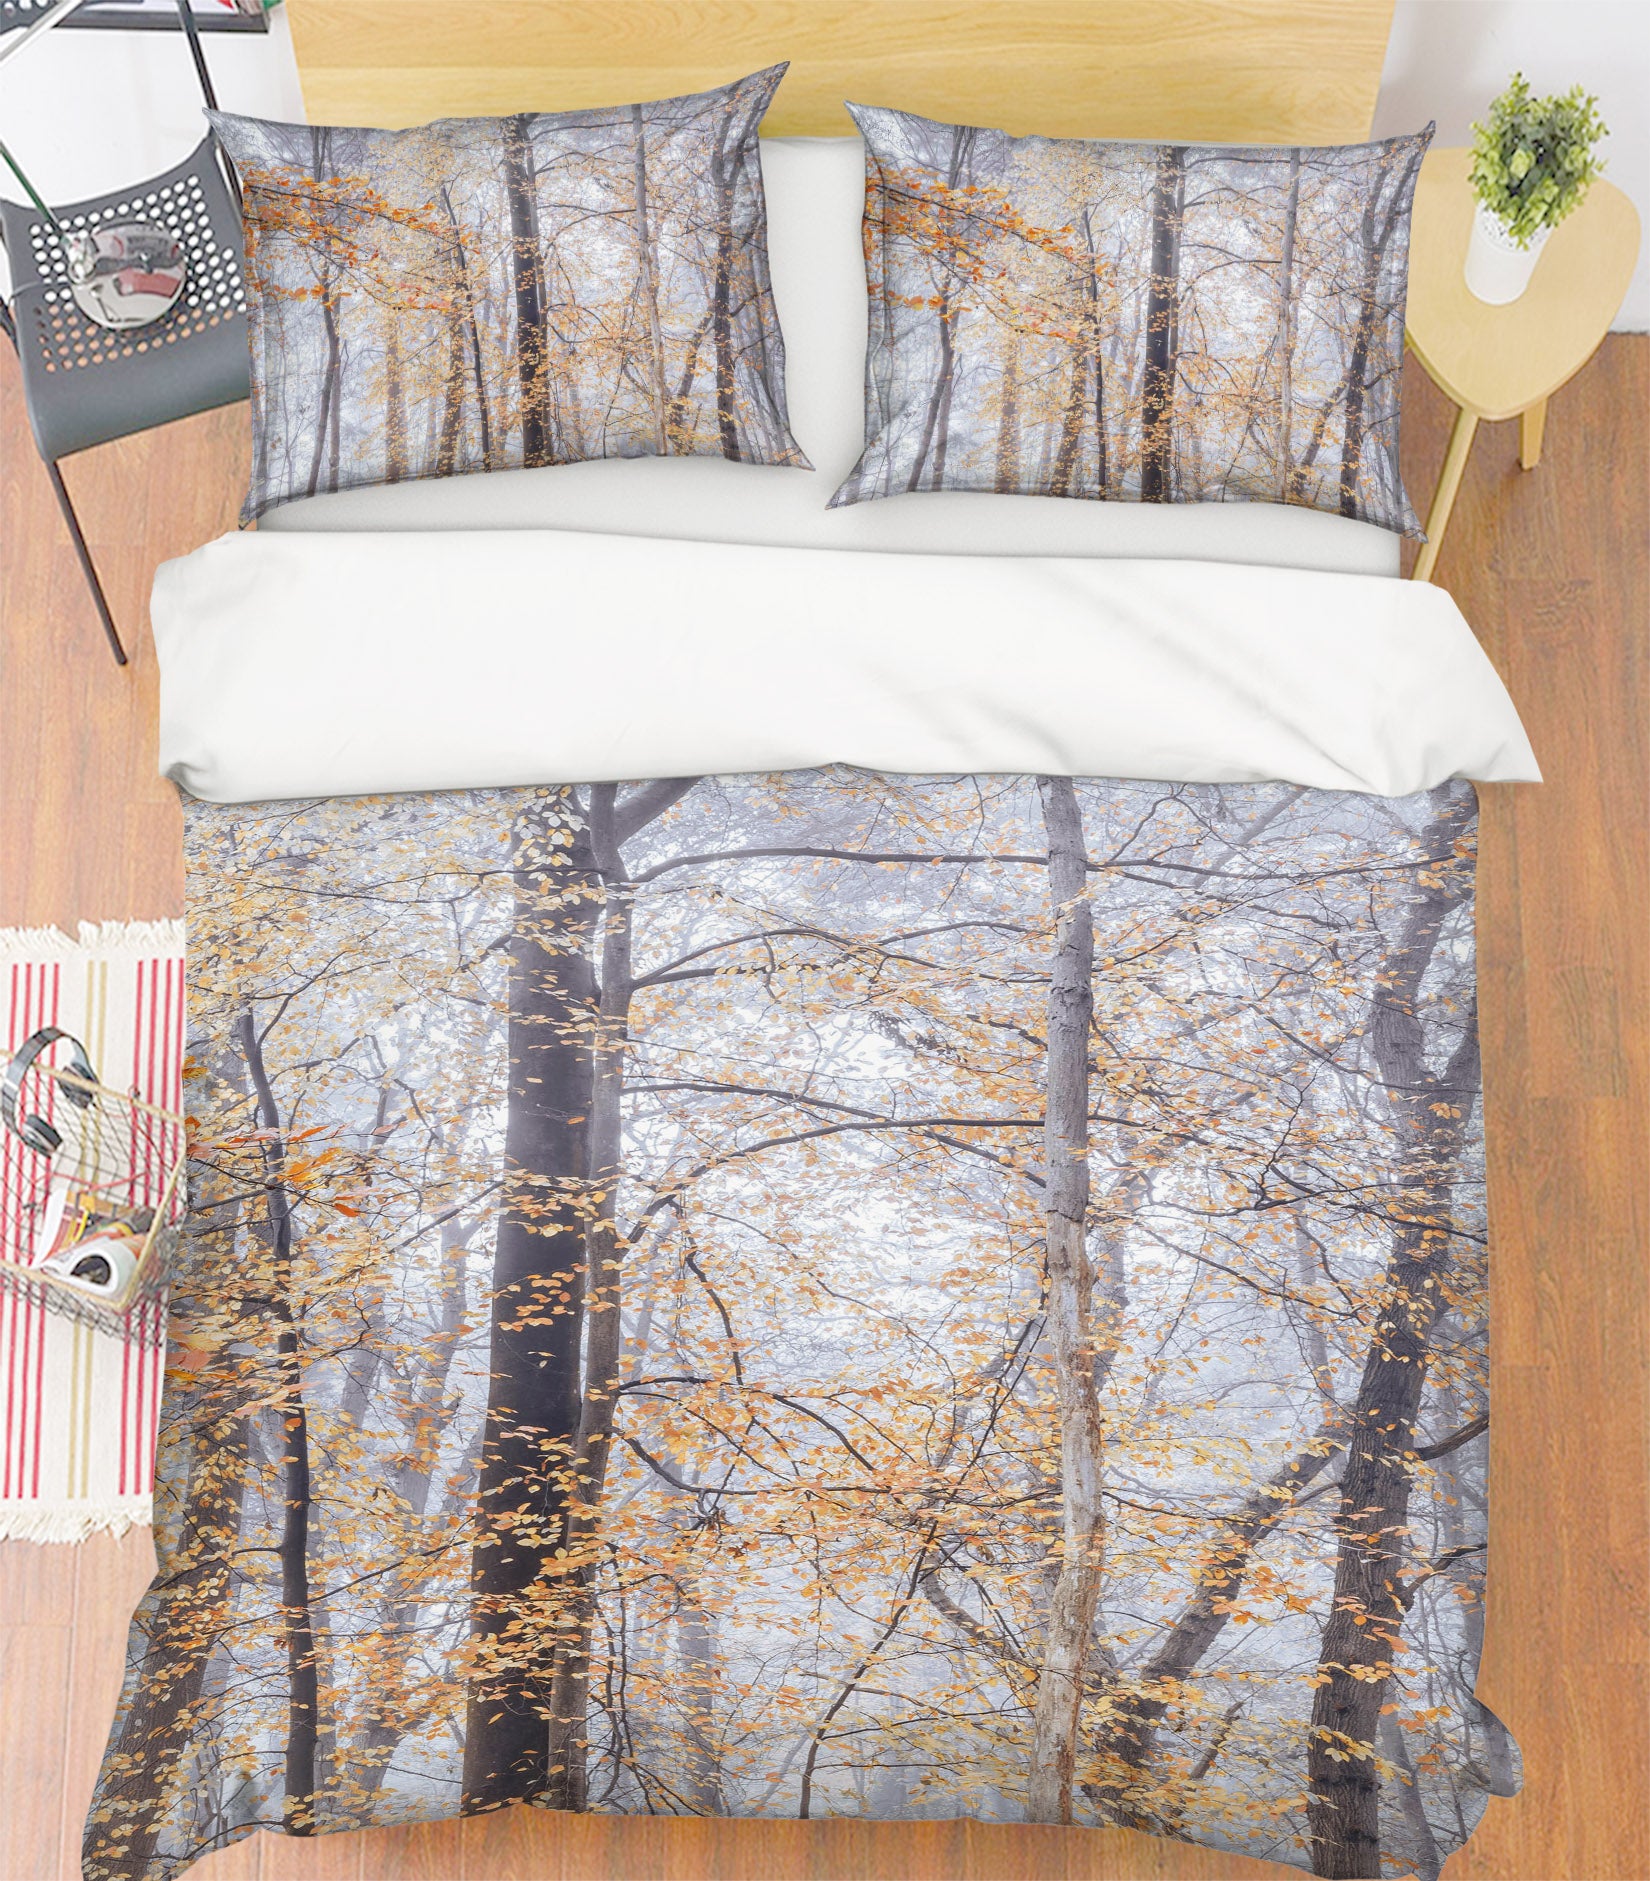 3D Tree Branches 7227 Assaf Frank Bedding Bed Pillowcases Quilt Cover Duvet Cover